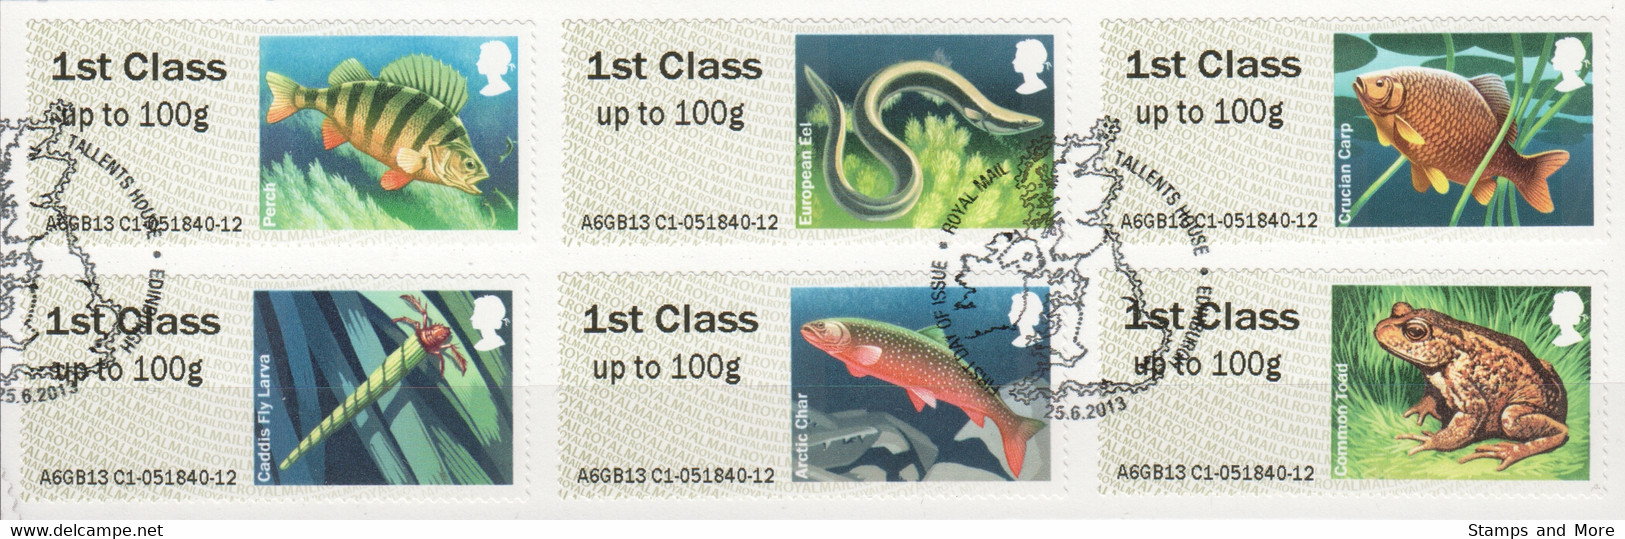 Great Britain Automatenmarken 2013 Mi 53-58 Canceled LIFE AT THE LAKE - Post & Go Stamps